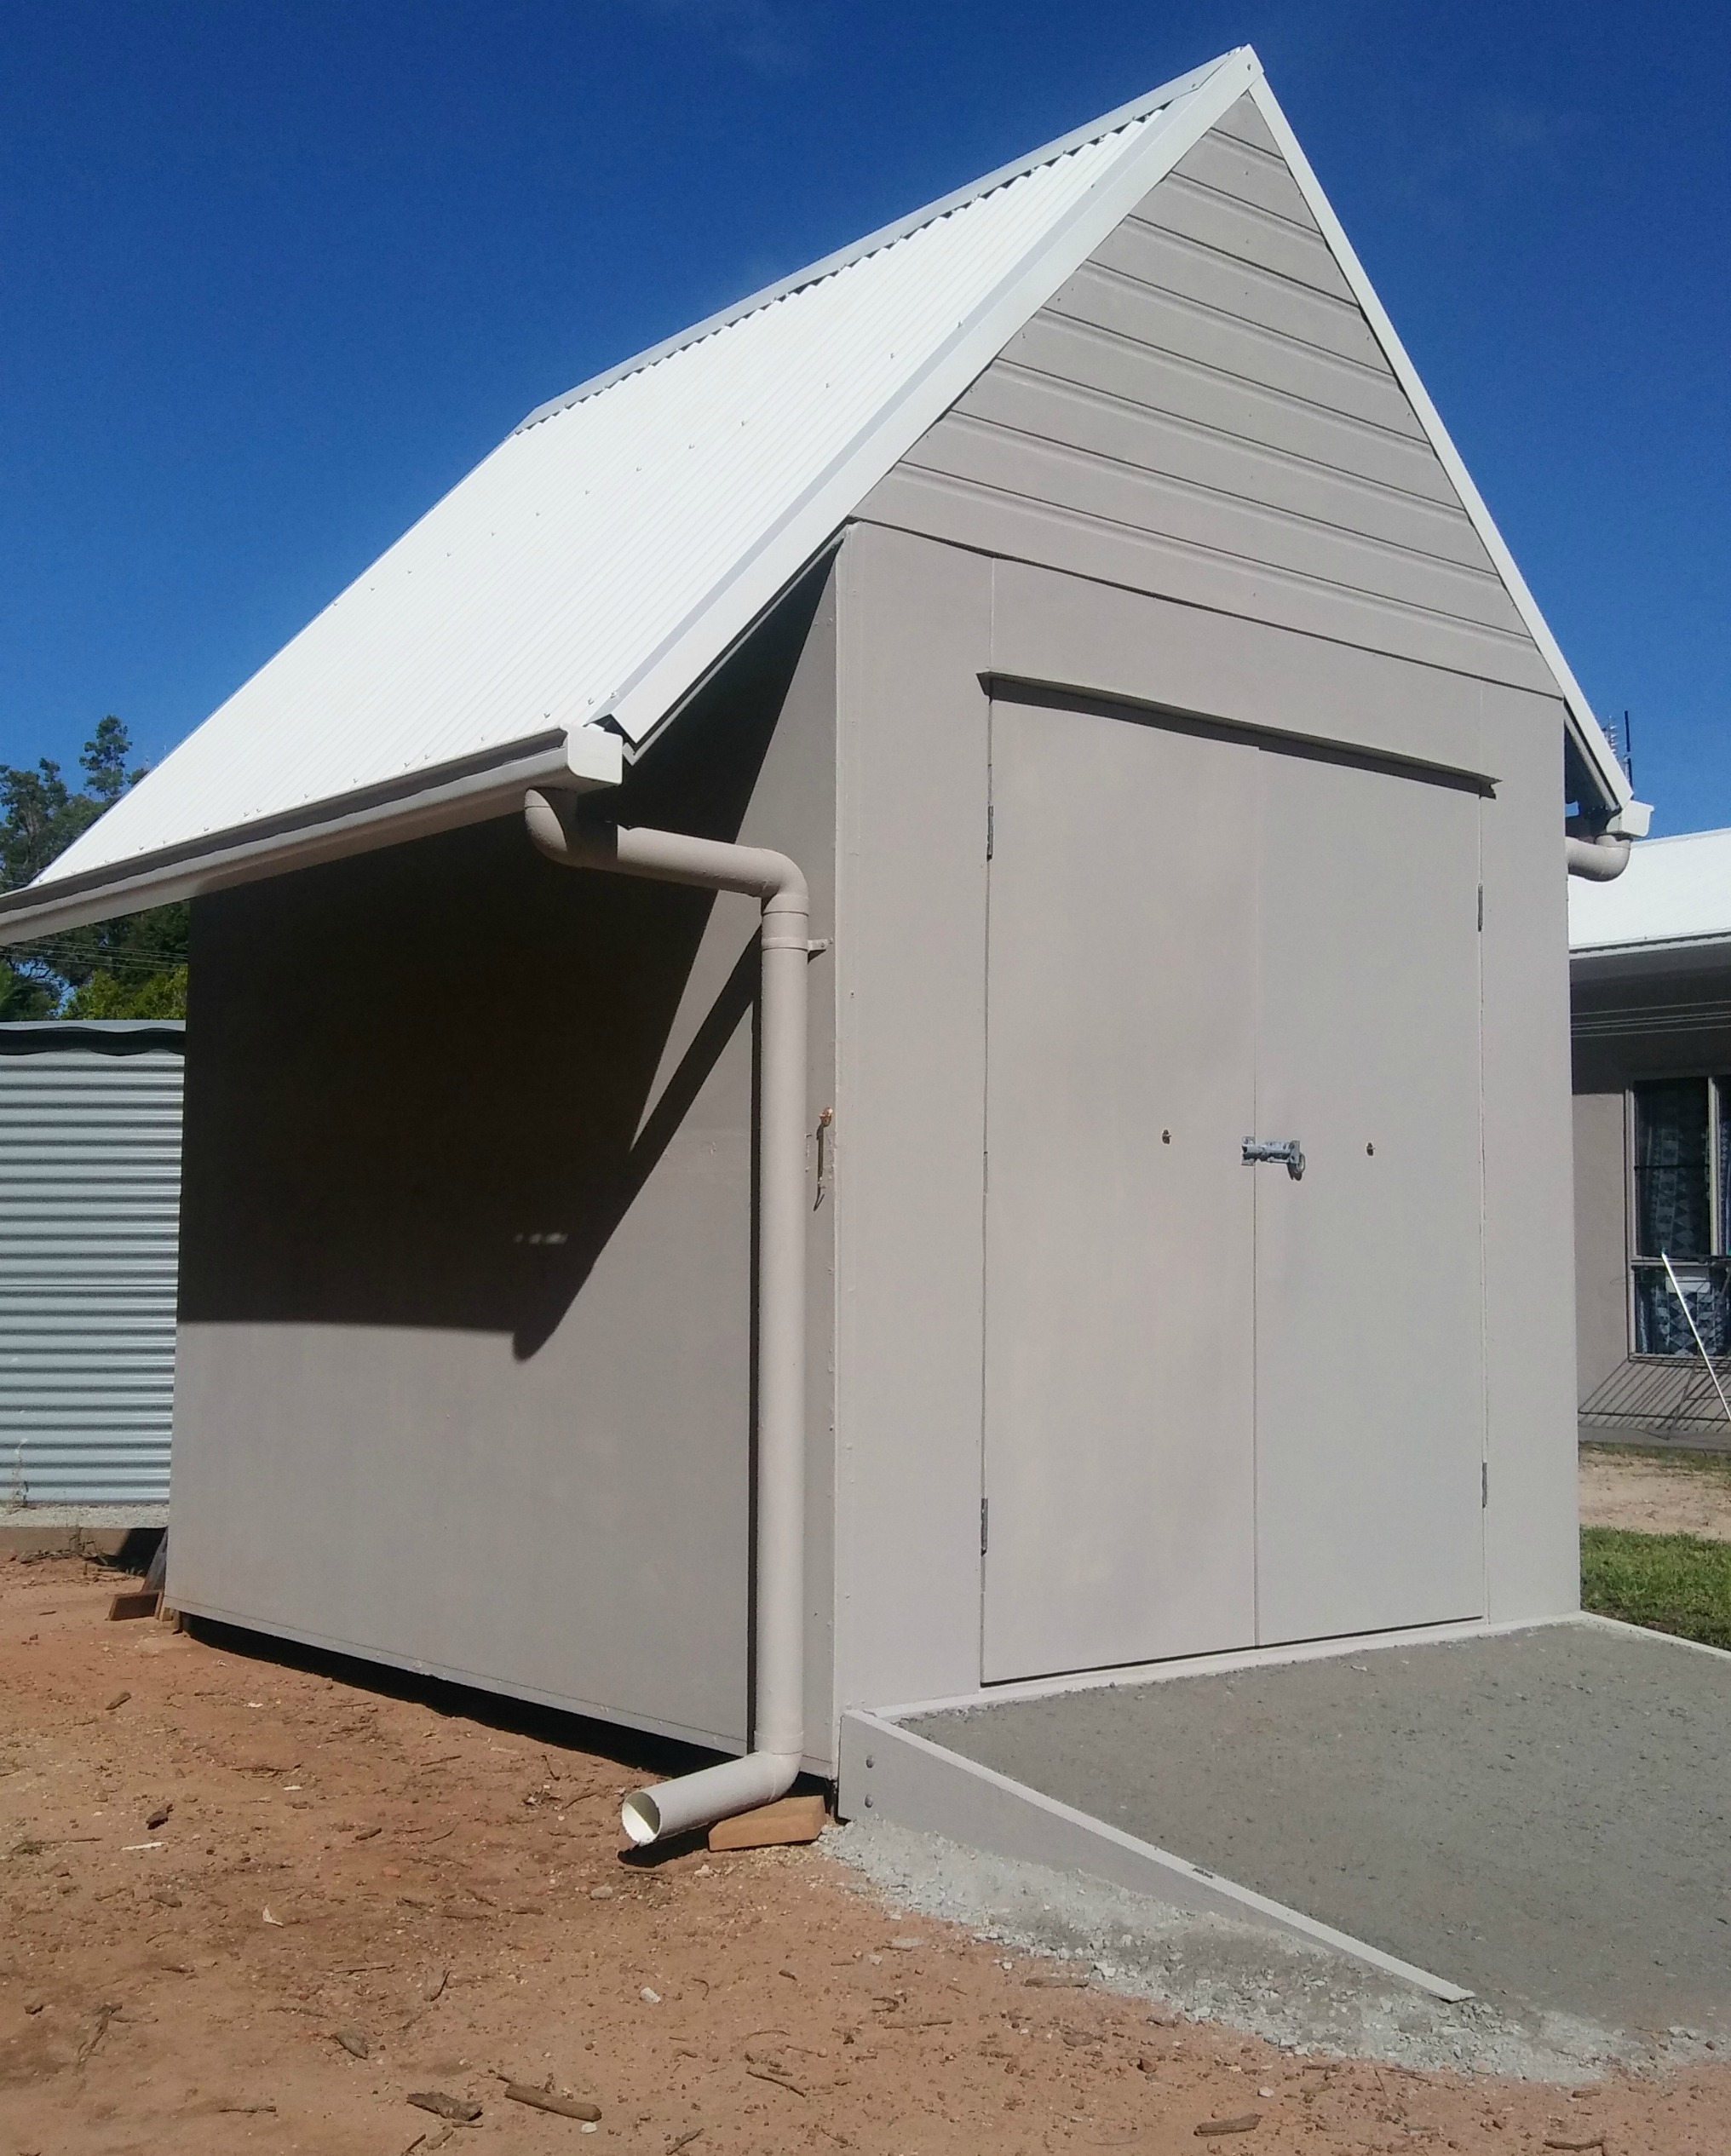 How to build a steel framed garden shed